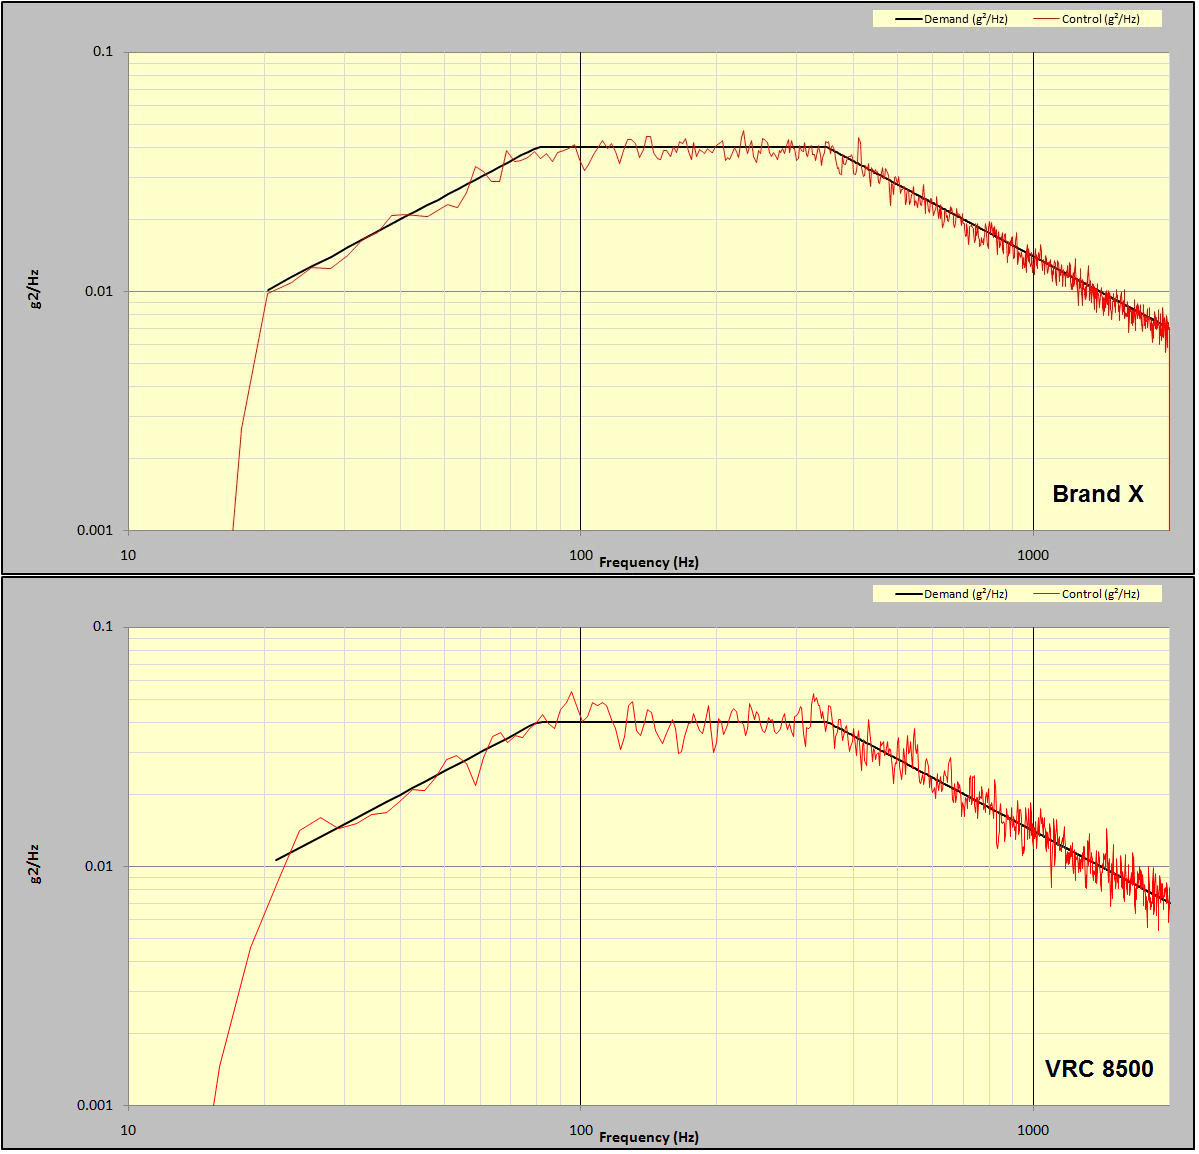 Figure 12: Comparison of NAVMAT test run on Brand X and VR8500 controllers.